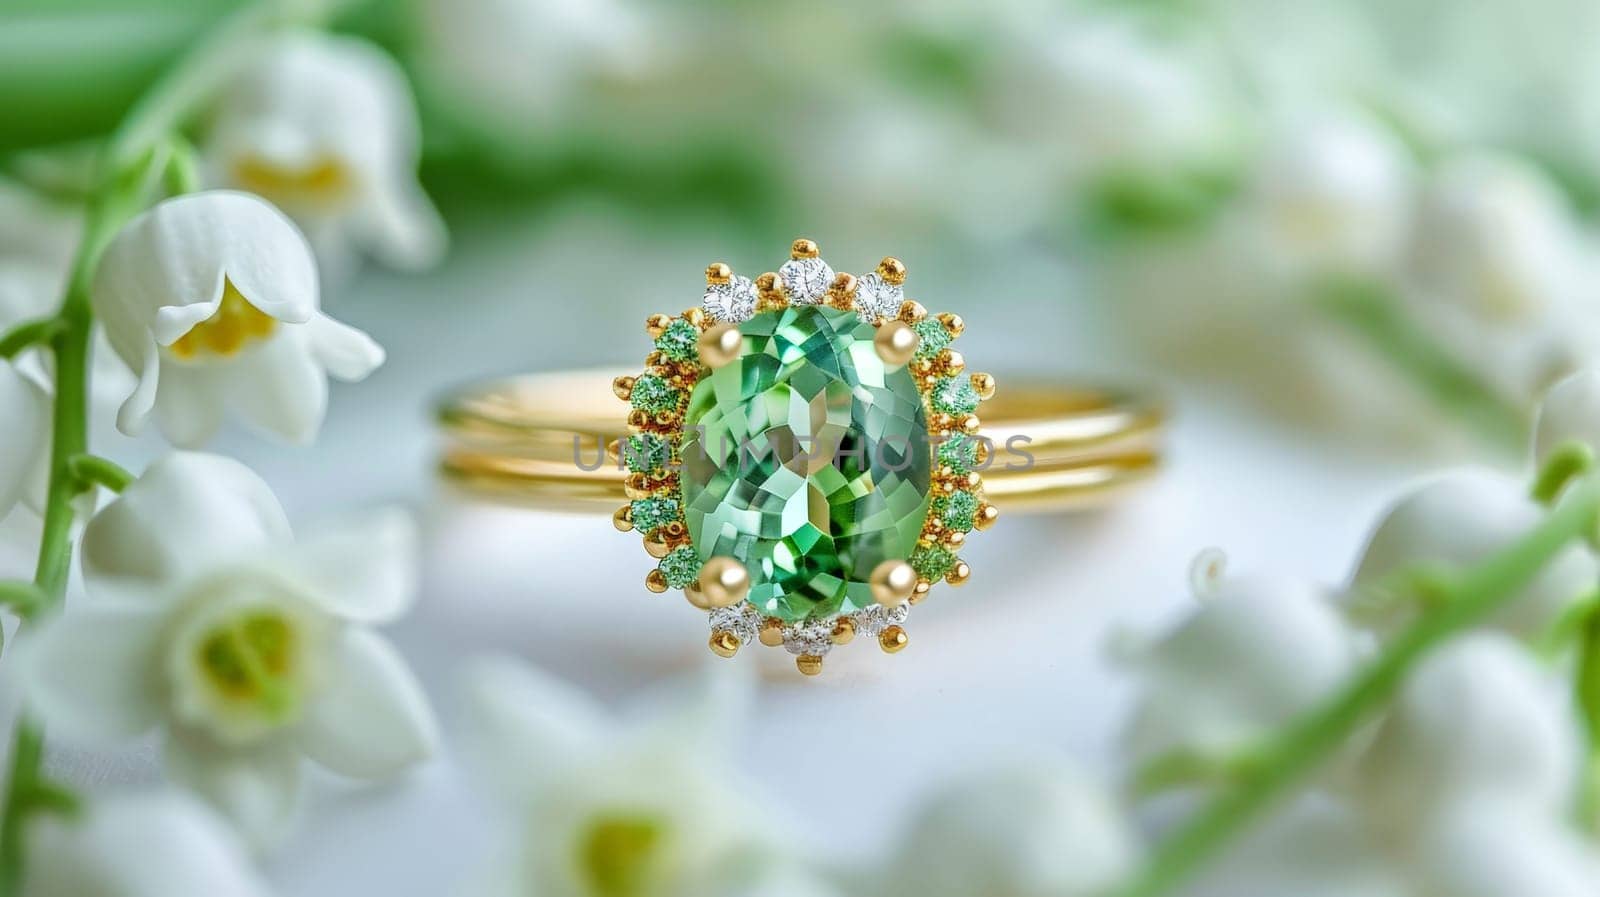 A green and white ring with a diamond and a green stone. The ring is set in gold and is surrounded by white flowers